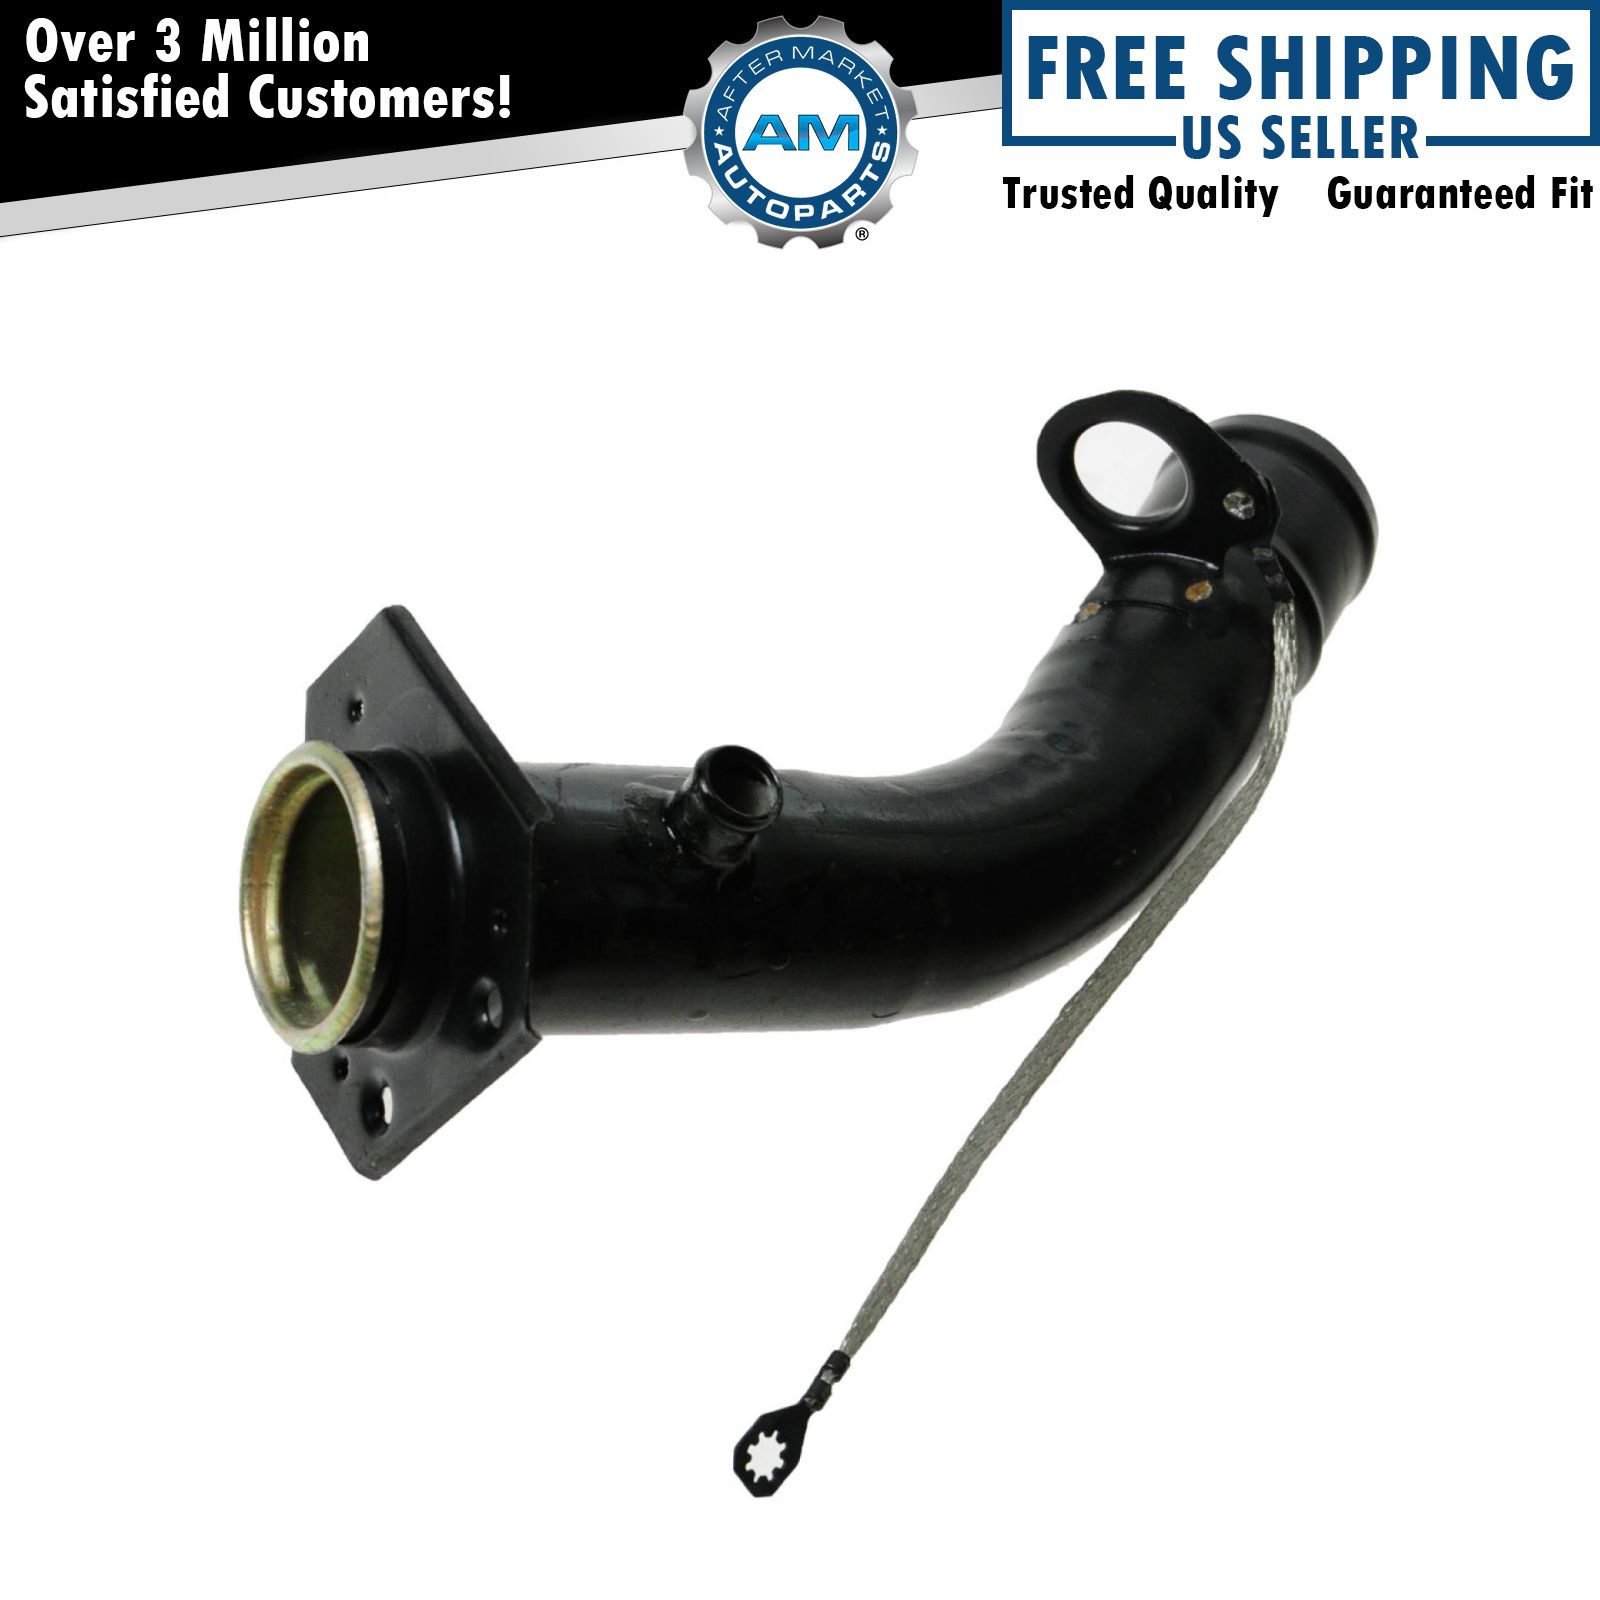 Diesel Fuel Tank Filler Neck Hose Pipe for 88-00 Chevy GMC Pickup Truck